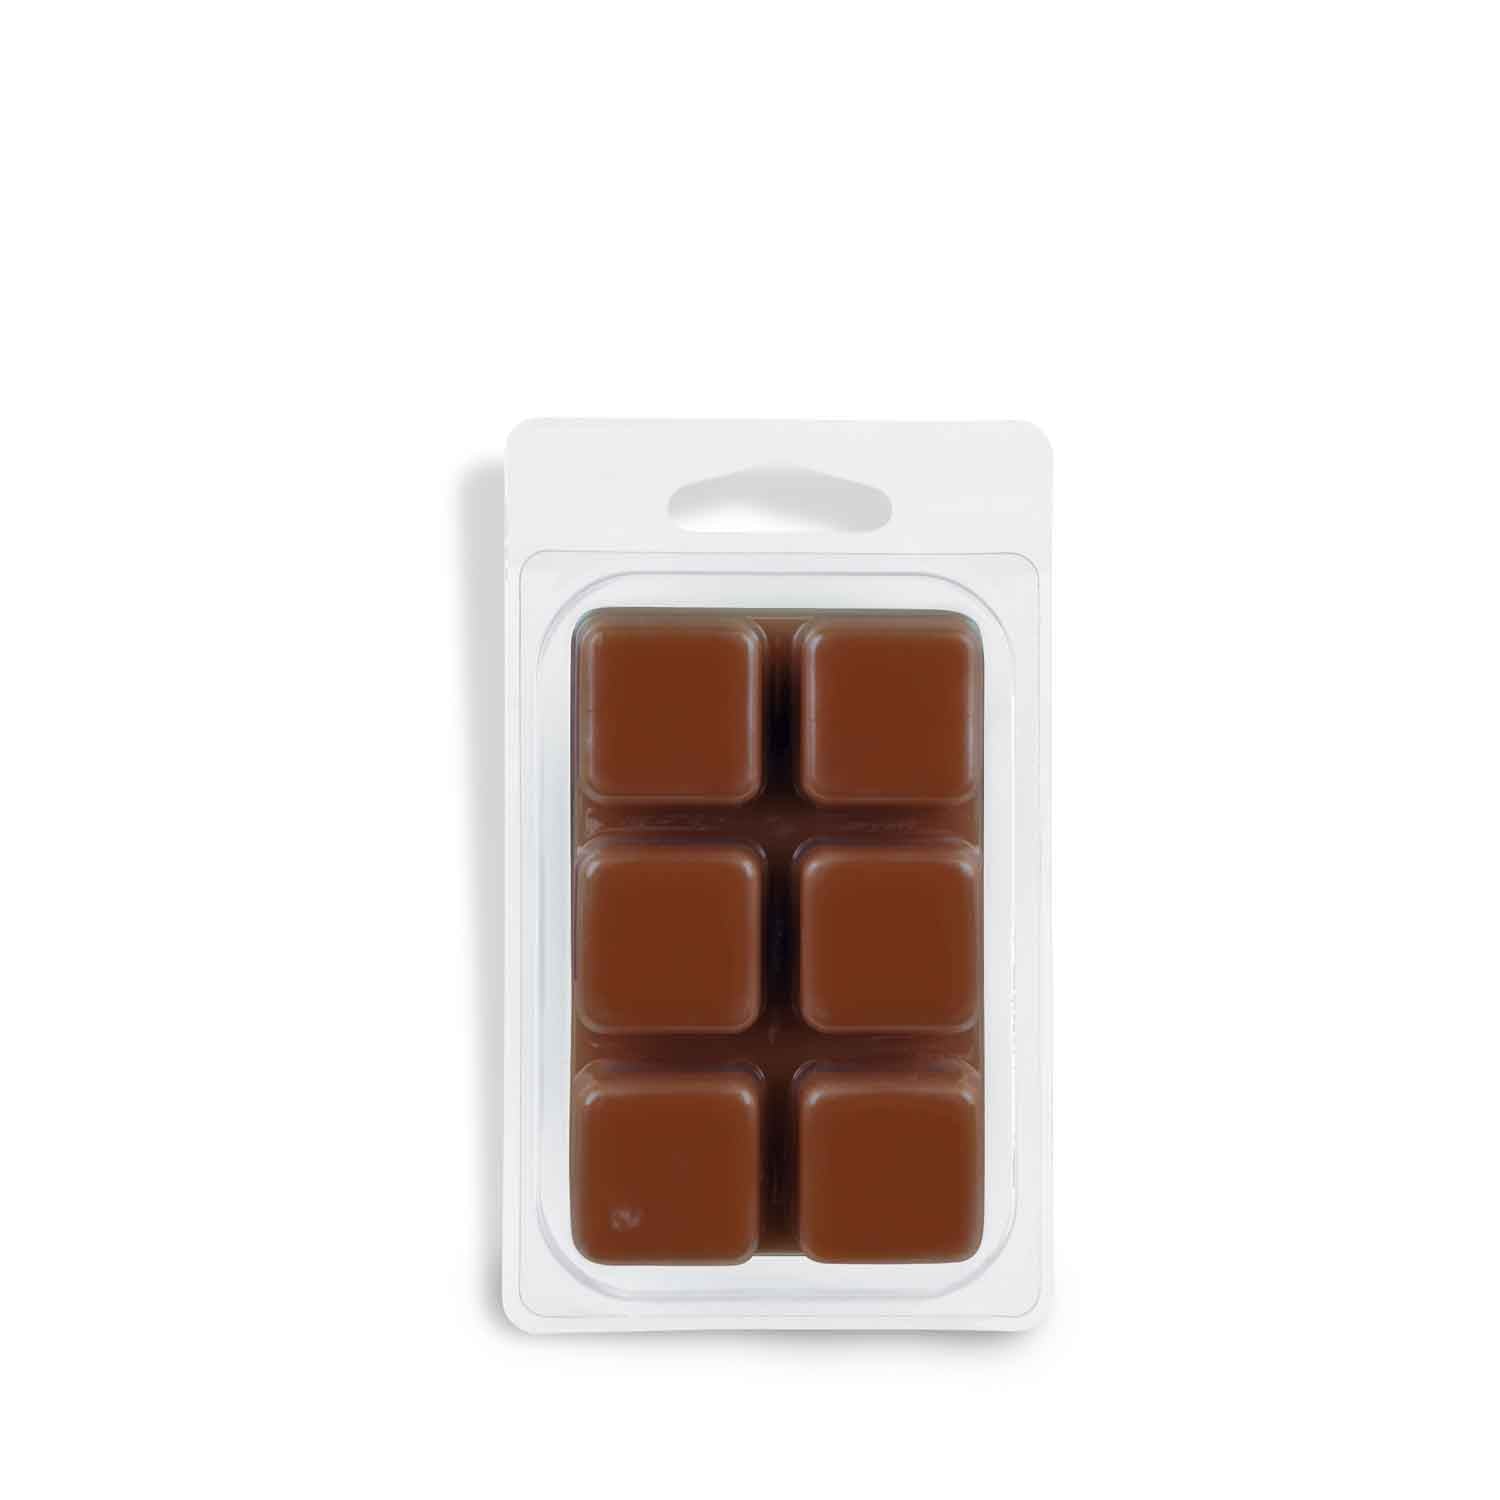 Tuscany Candle® Patchouli Scented Wax Melt (2.5 oz) bars in a package on a white background.